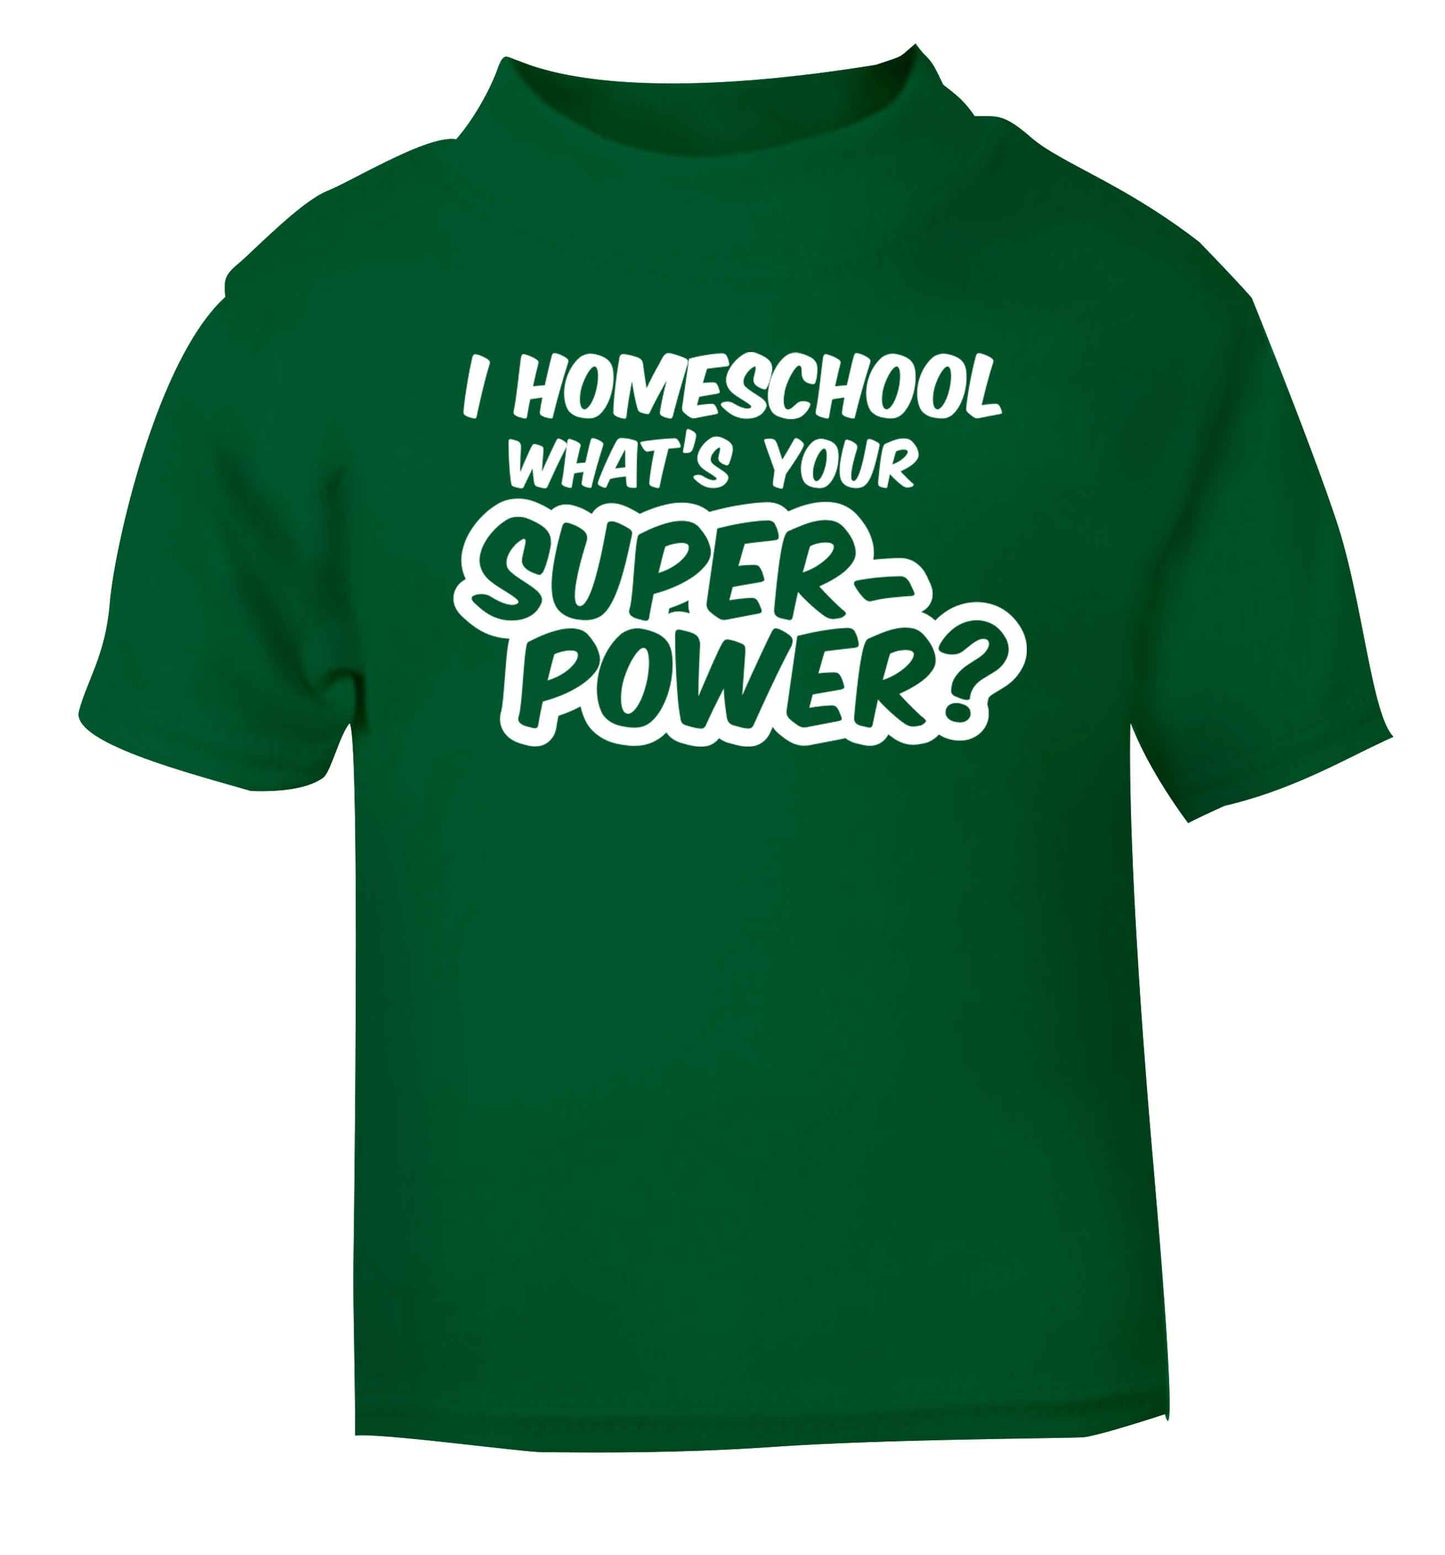 I homeschool what's your superpower? green Baby Toddler Tshirt 2 Years